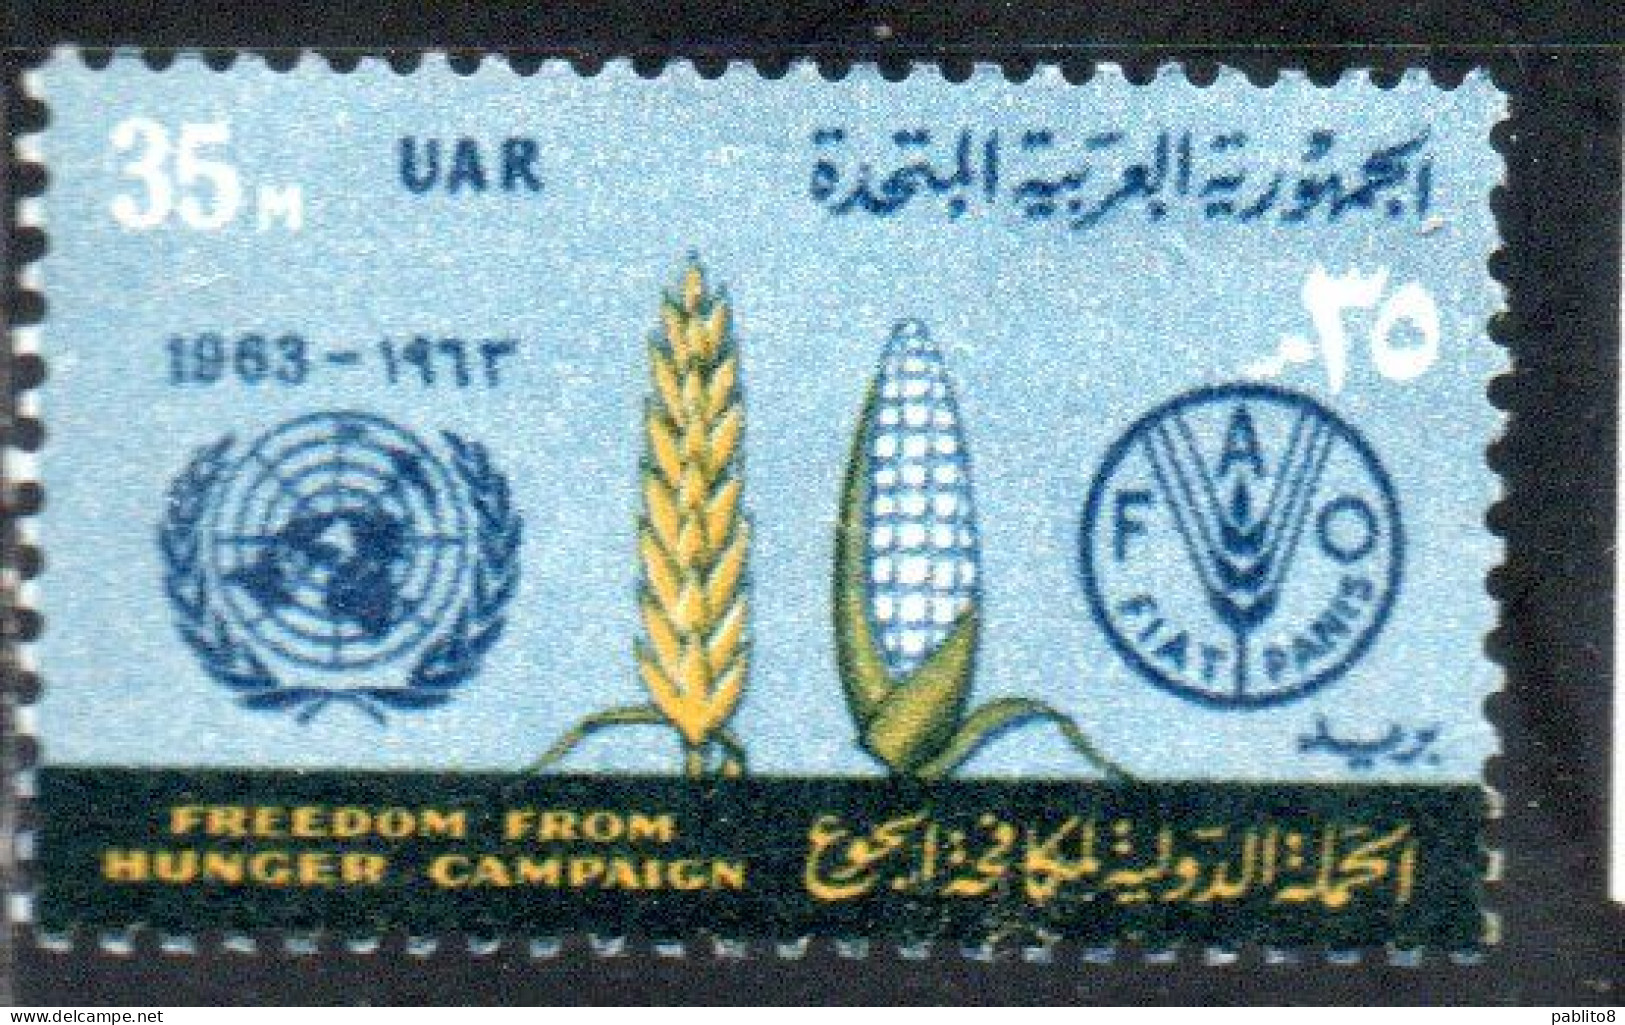 UAR EGYPT EGITTO 1963 FAO FREEDOM FROM HUNGER CAMPAIGN WHEAT CORN AND EMBLEMS 35m  MNH - Neufs